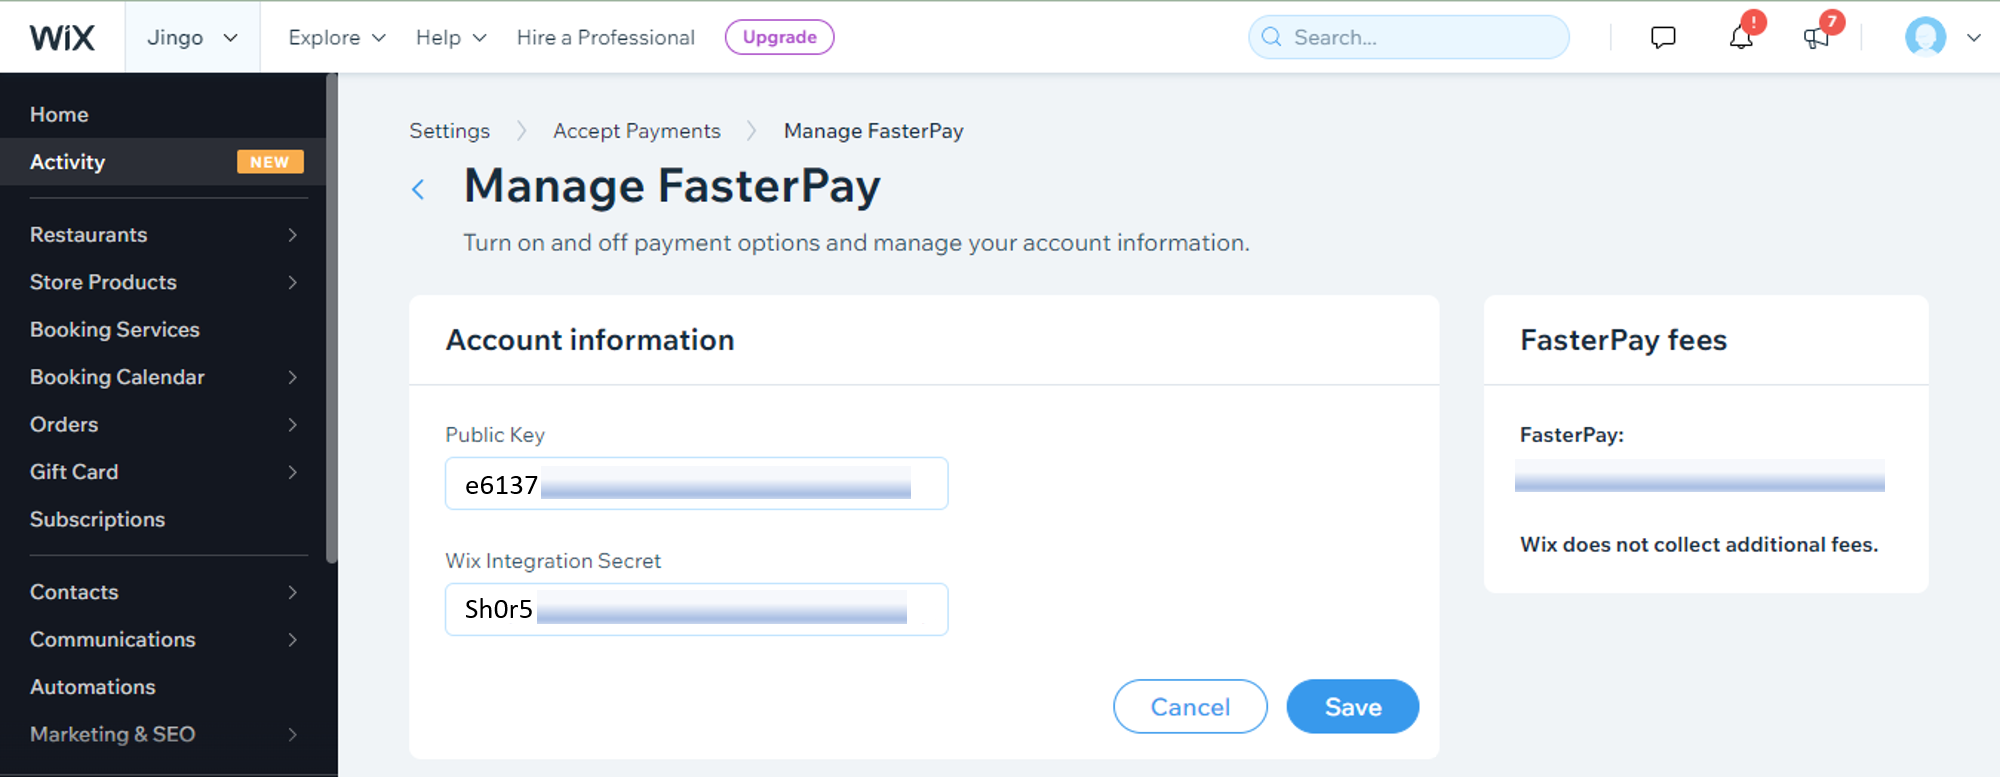 Configure Wix FasterPay App